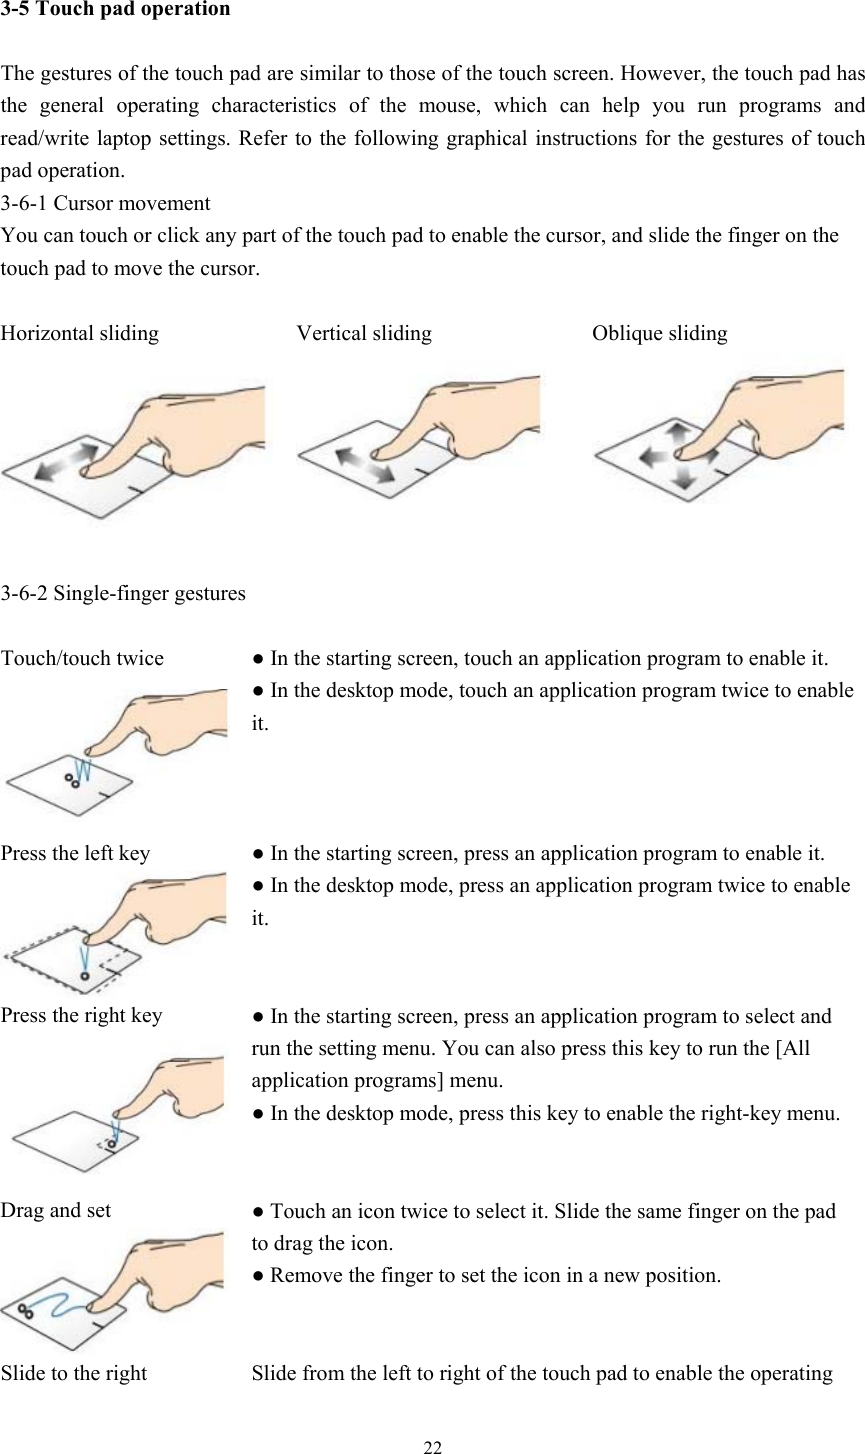   22 3-5 Touch pad operation  The gestures of the touch pad are similar to those of the touch screen. However, the touch pad has the  general  operating  characteristics  of  the  mouse,  which  can  help  you  run  programs  and read/write laptop settings. Refer to the following graphical instructions for the gestures of touch pad operation. 3-6-1 Cursor movement You can touch or click any part of the touch pad to enable the cursor, and slide the finger on the touch pad to move the cursor.  Horizontal sliding  Vertical sliding  Oblique sliding     3-6-2 Single-finger gestures  Touch/touch twice  ● In the starting screen, touch an application program to enable it. ● In the desktop mode, touch an application program twice to enable it. Press the left key  ● In the starting screen, press an application program to enable it. ● In the desktop mode, press an application program twice to enable it. Press the right key  ● In the starting screen, press an application program to select and run the setting menu. You can also press this key to run the [All application programs] menu. ● In the desktop mode, press this key to enable the right-key menu. Drag and set  ● Touch an icon twice to select it. Slide the same finger on the pad to drag the icon. ● Remove the finger to set the icon in a new position. Slide to the right  Slide from the left to right of the touch pad to enable the operating 